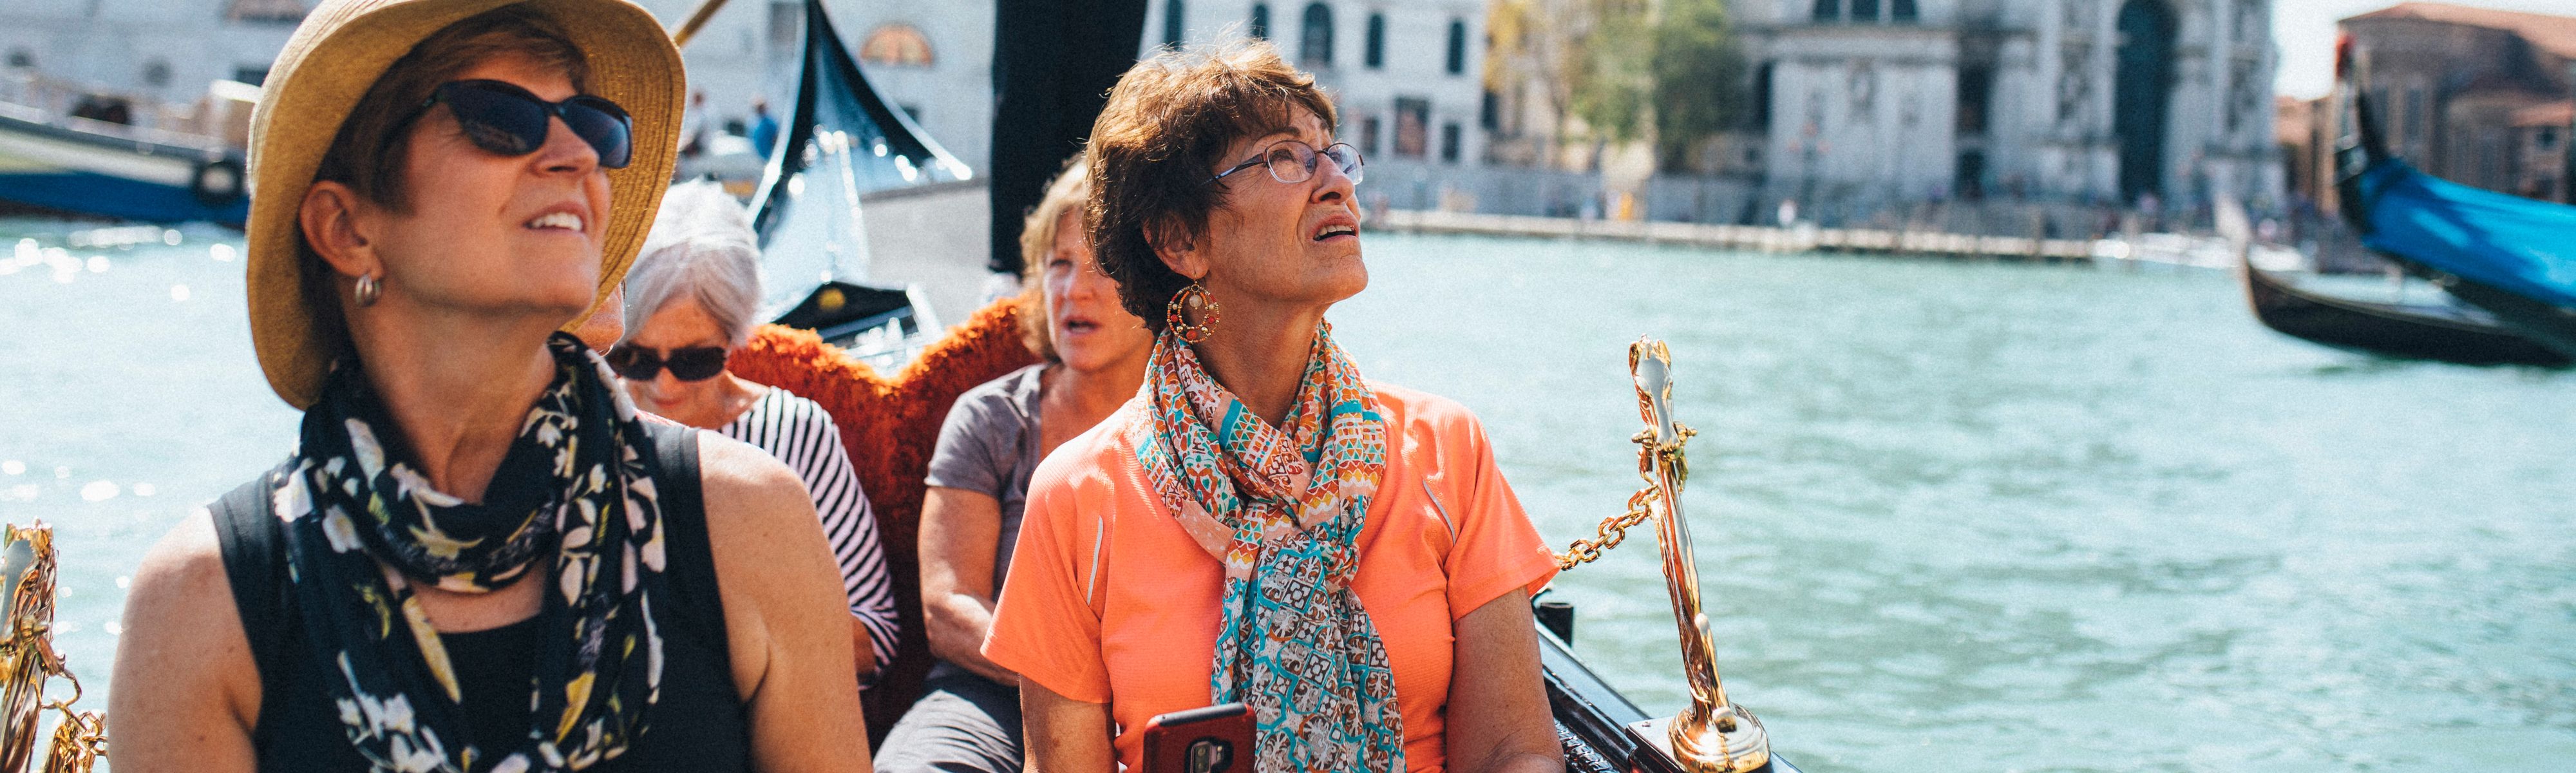 group of four women riding in a gondala in venice, italy